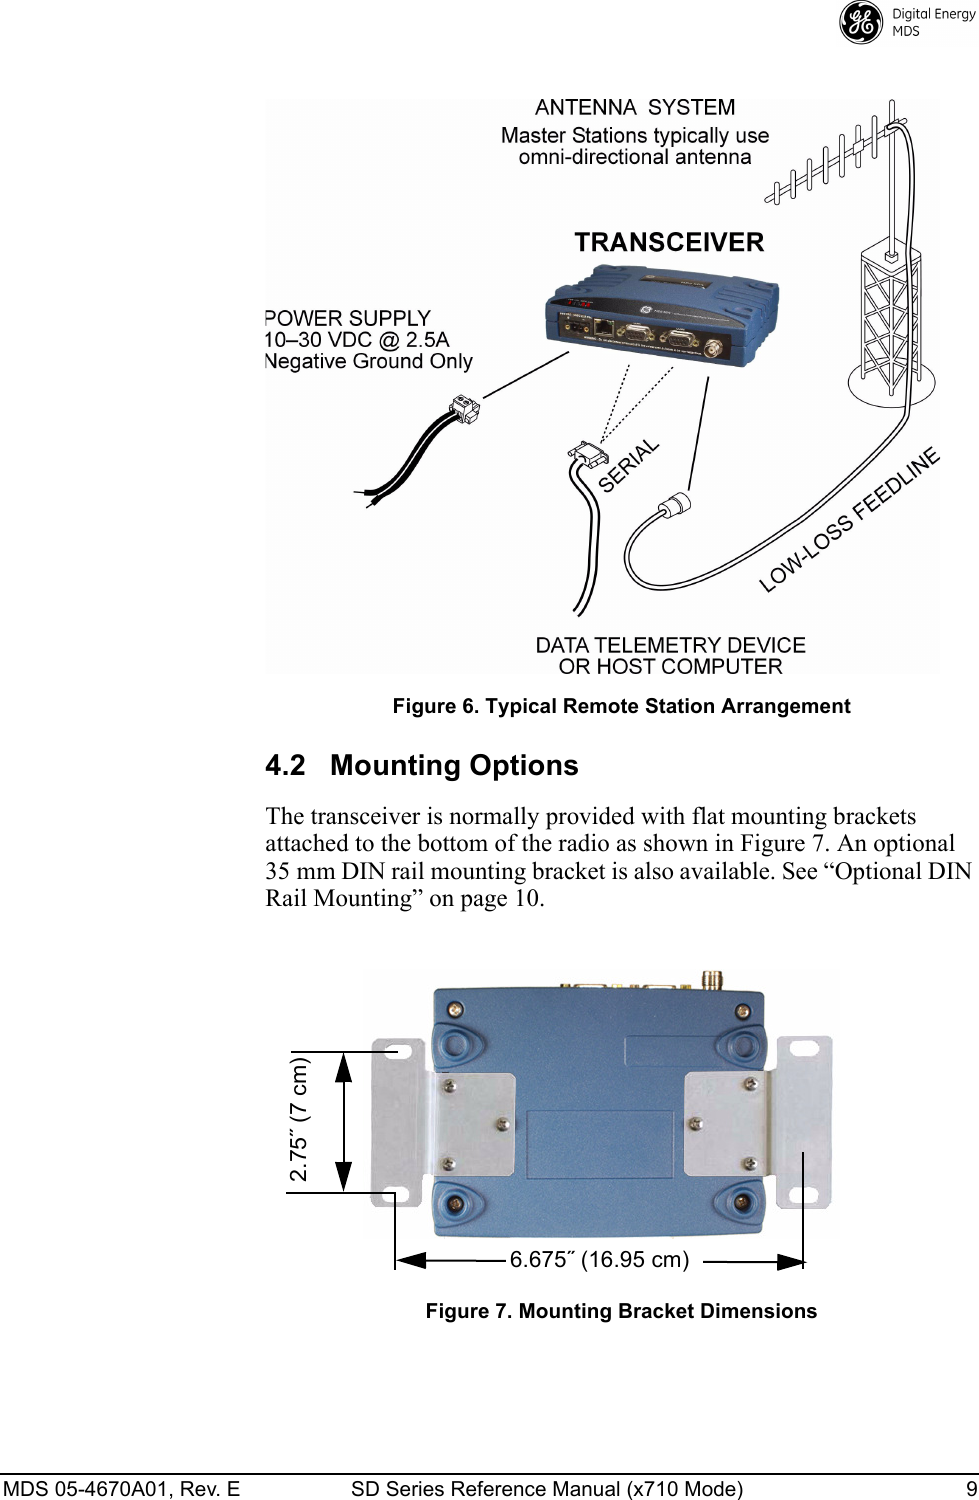 MDS 05-4670A01, Rev. E SD Series Reference Manual (x710 Mode) 9 Figure 6. Typical Remote Station Arrangement4.2 Mounting OptionsThe transceiver is normally provided with flat mounting brackets attached to the bottom of the radio as shown in Figure 7. An optional 35 mm DIN rail mounting bracket is also available. See “Optional DIN Rail Mounting” on page 10.Invisible place holderFigure 7. Mounting Bracket Dimensions6.675˝ (16.95 cm)2.75˝ (7 cm)